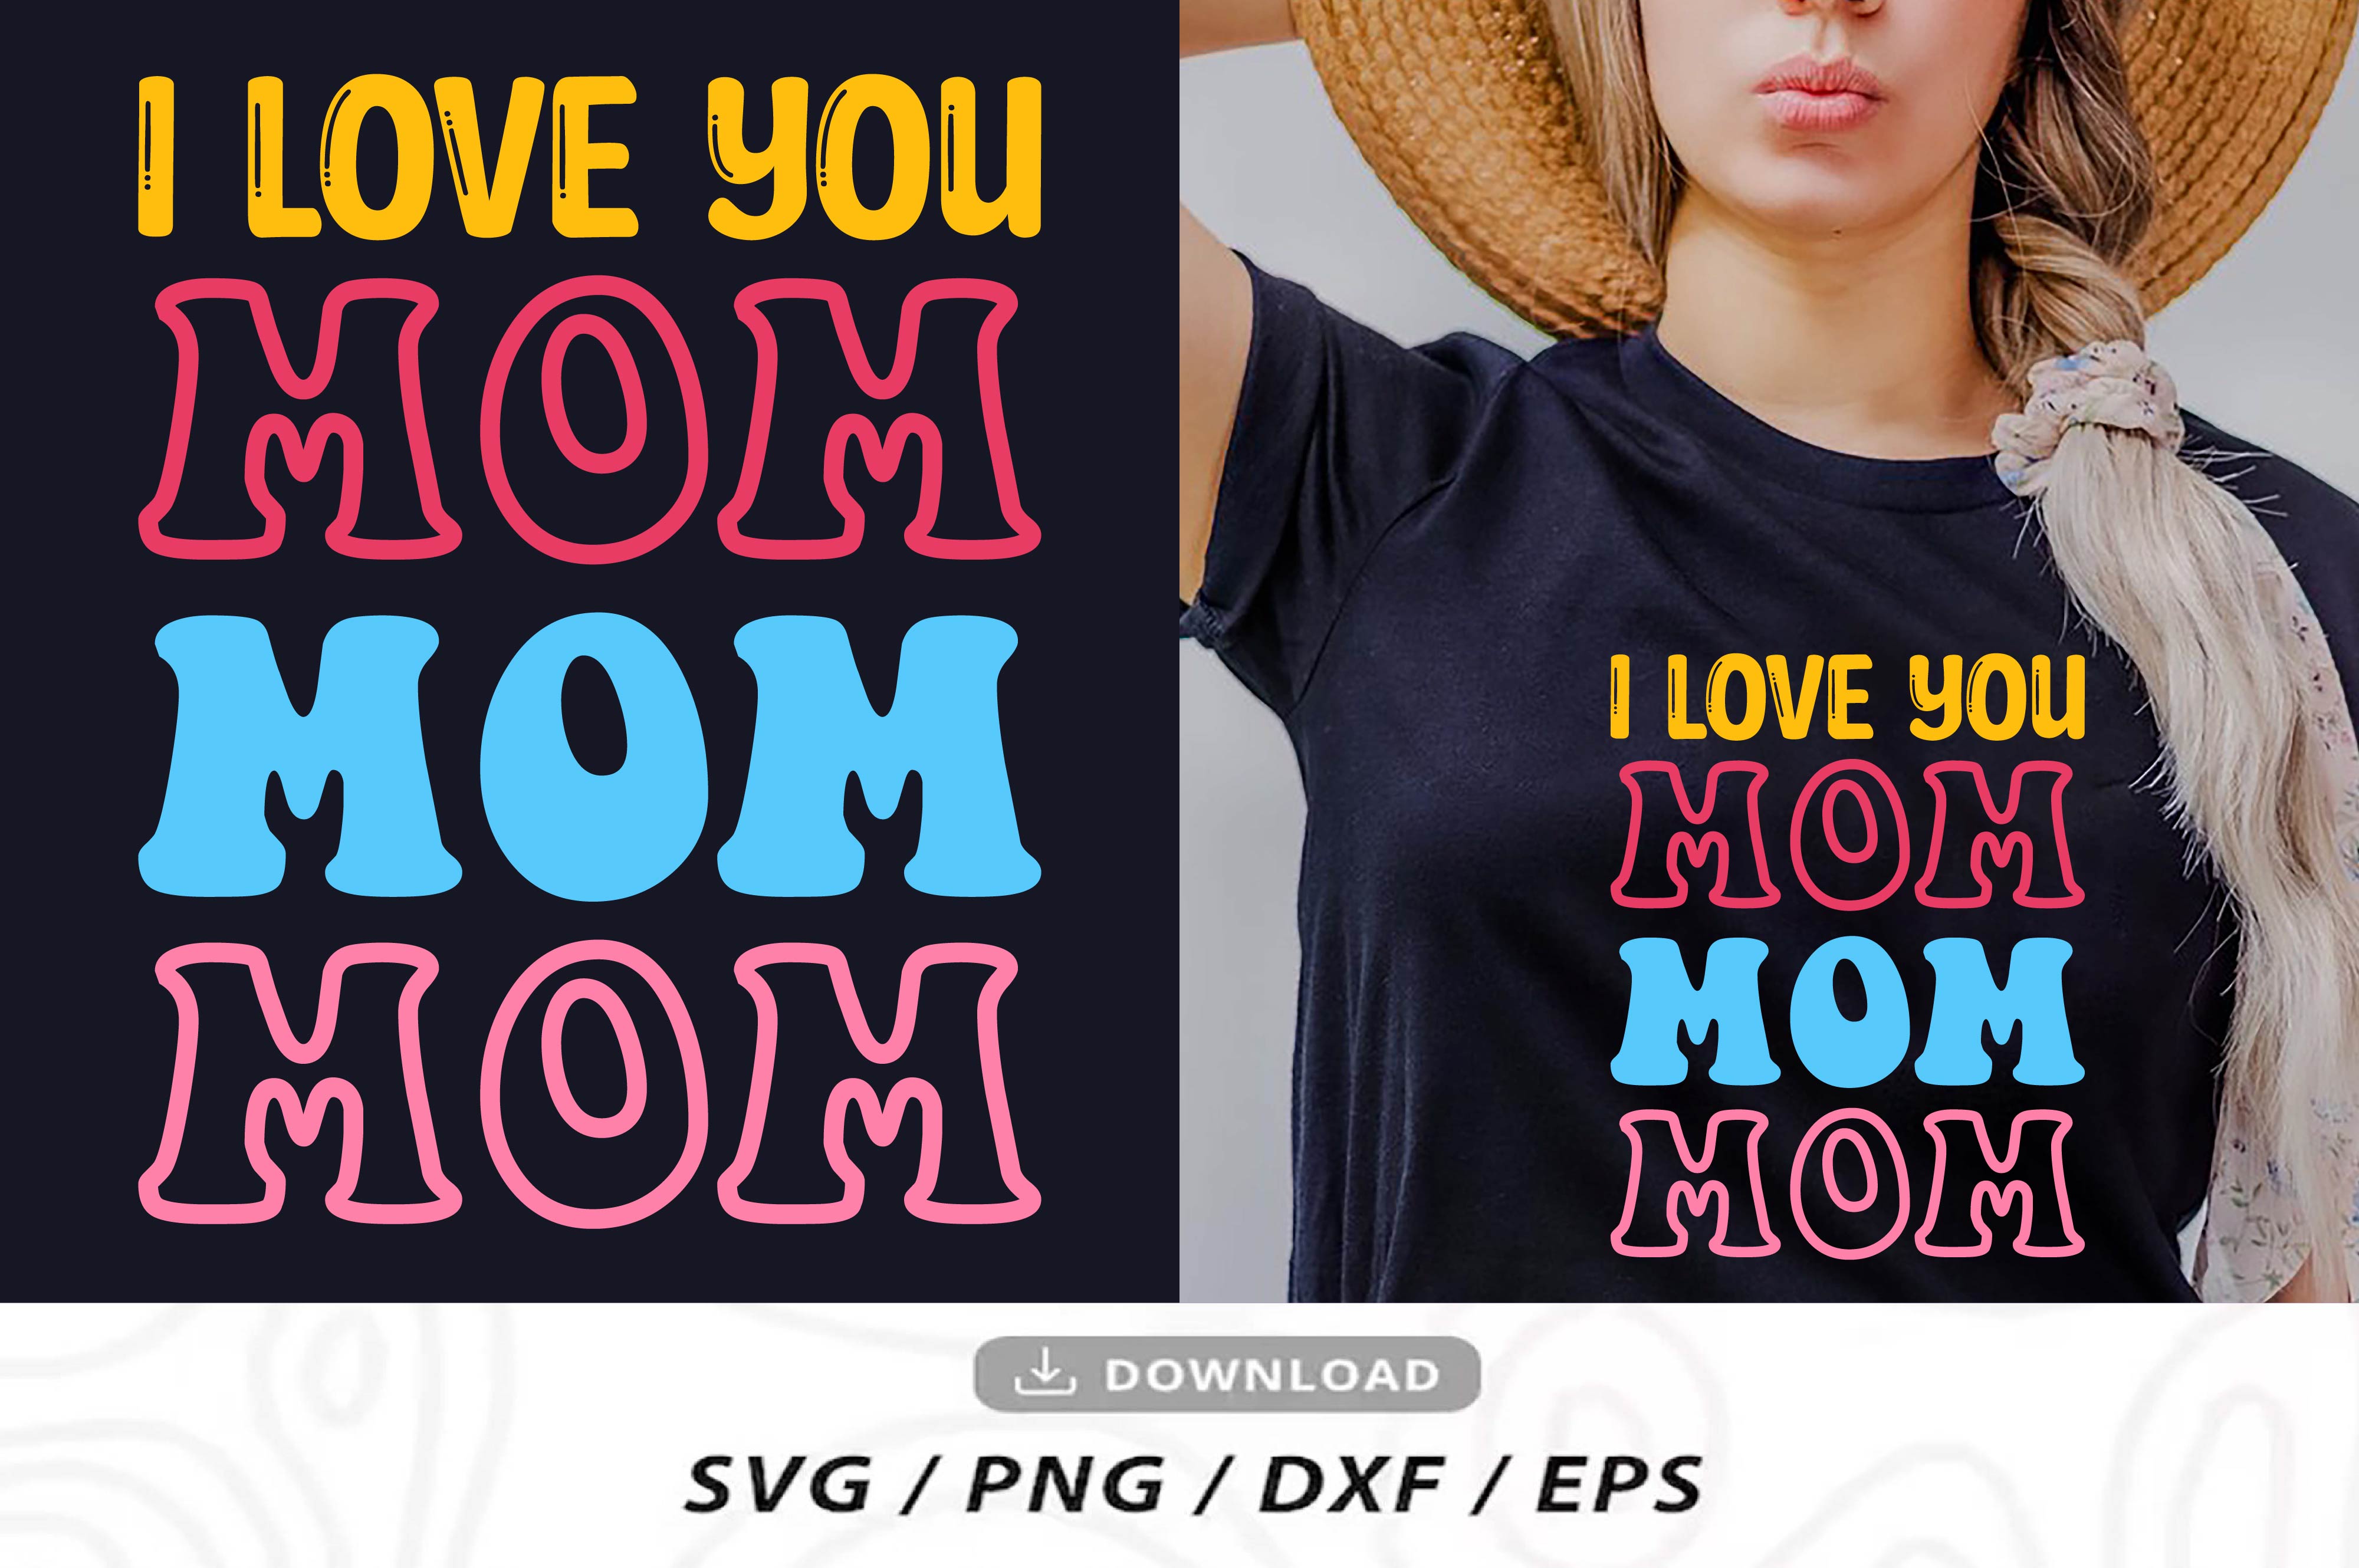 Woman wearing a hat and a t - shirt that says i love you mom.